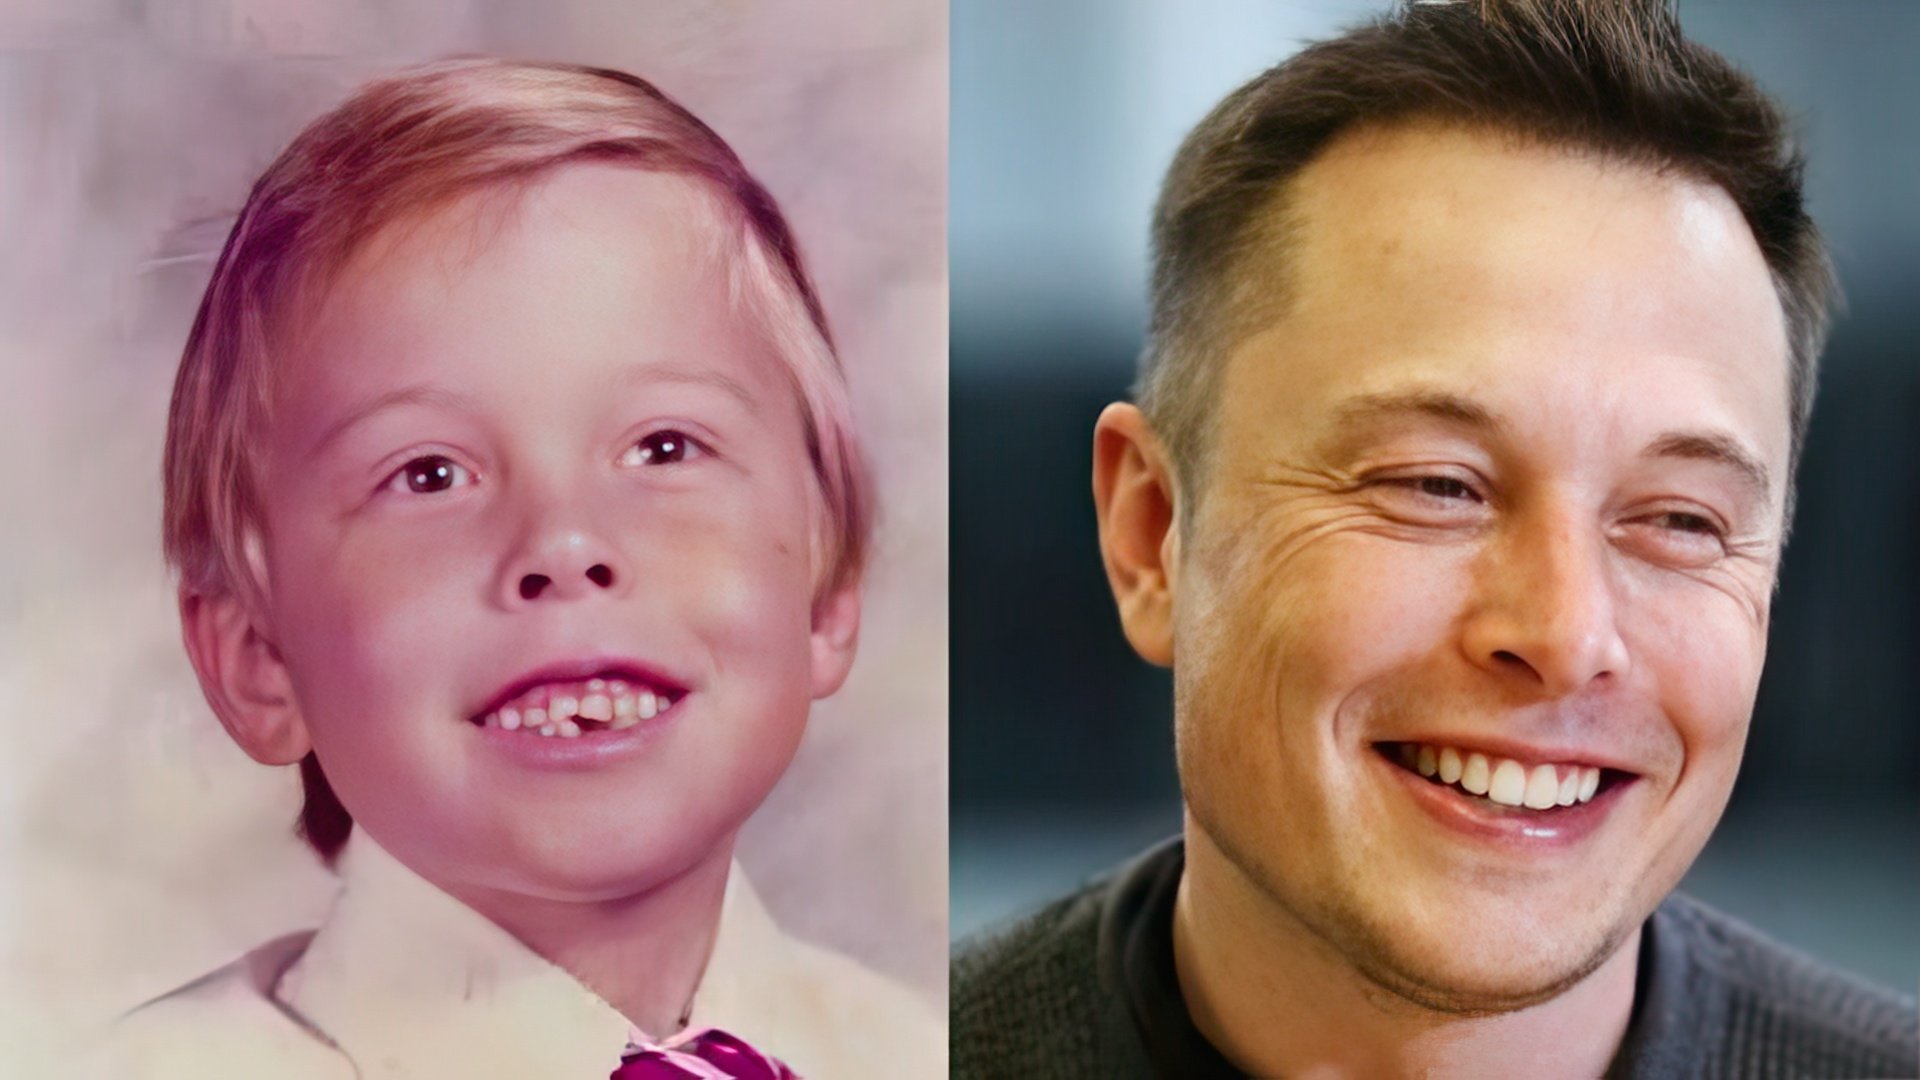 Elon Musk in childhood and now